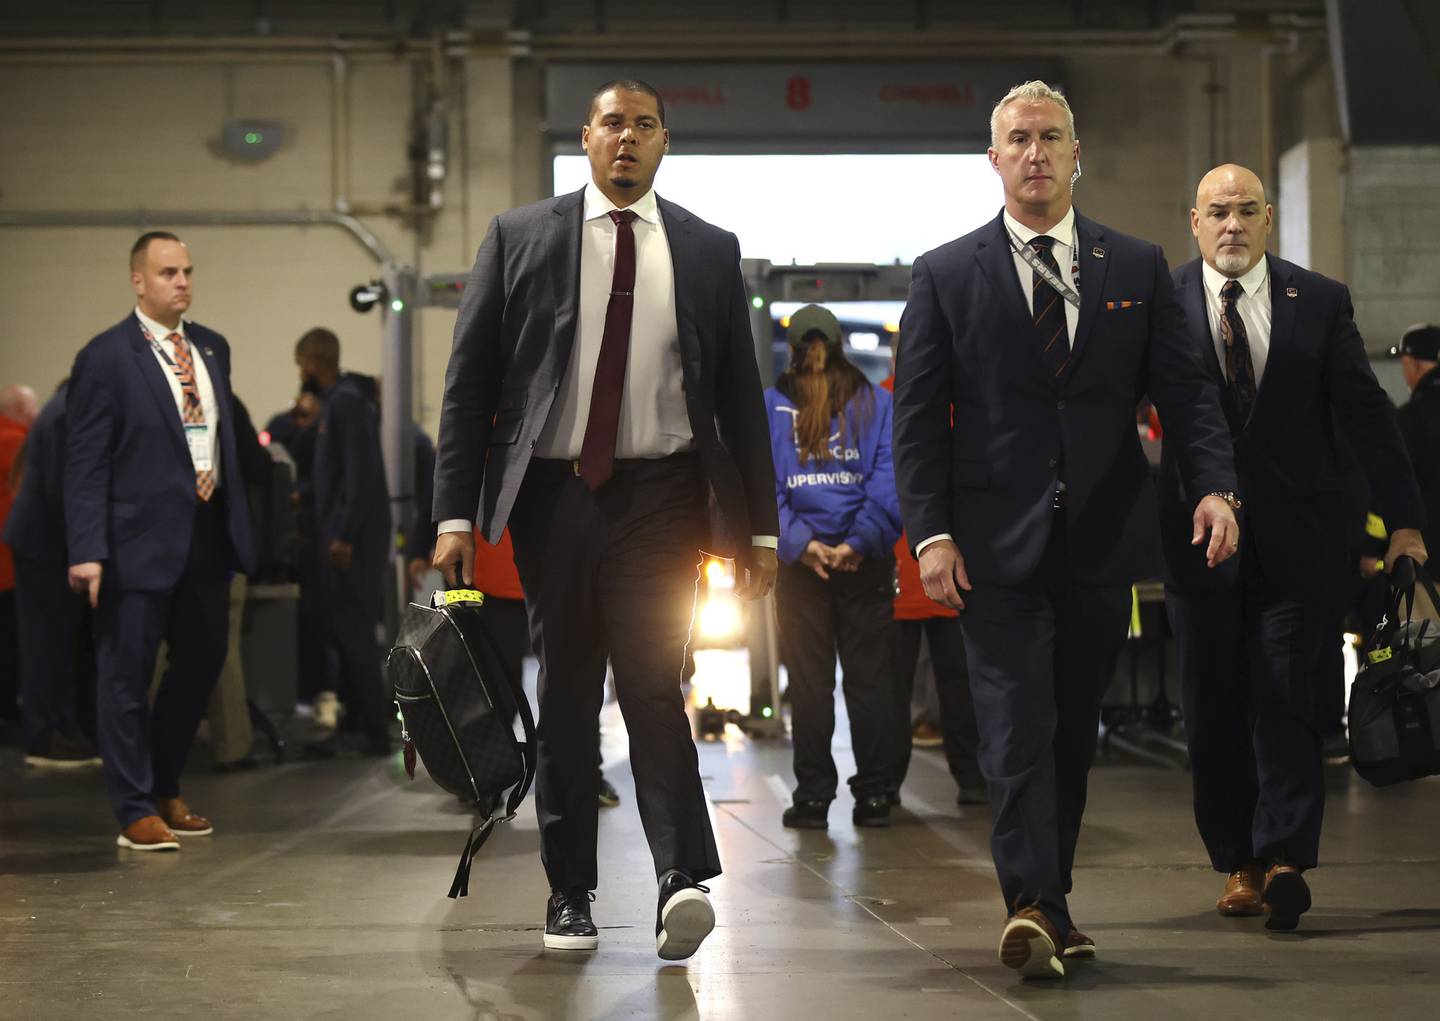 Bears GM Ryan Poles walks to the locker room following team buses arriving for a game against the Patriots at Gillette Stadium on Oct. 24, 2022.